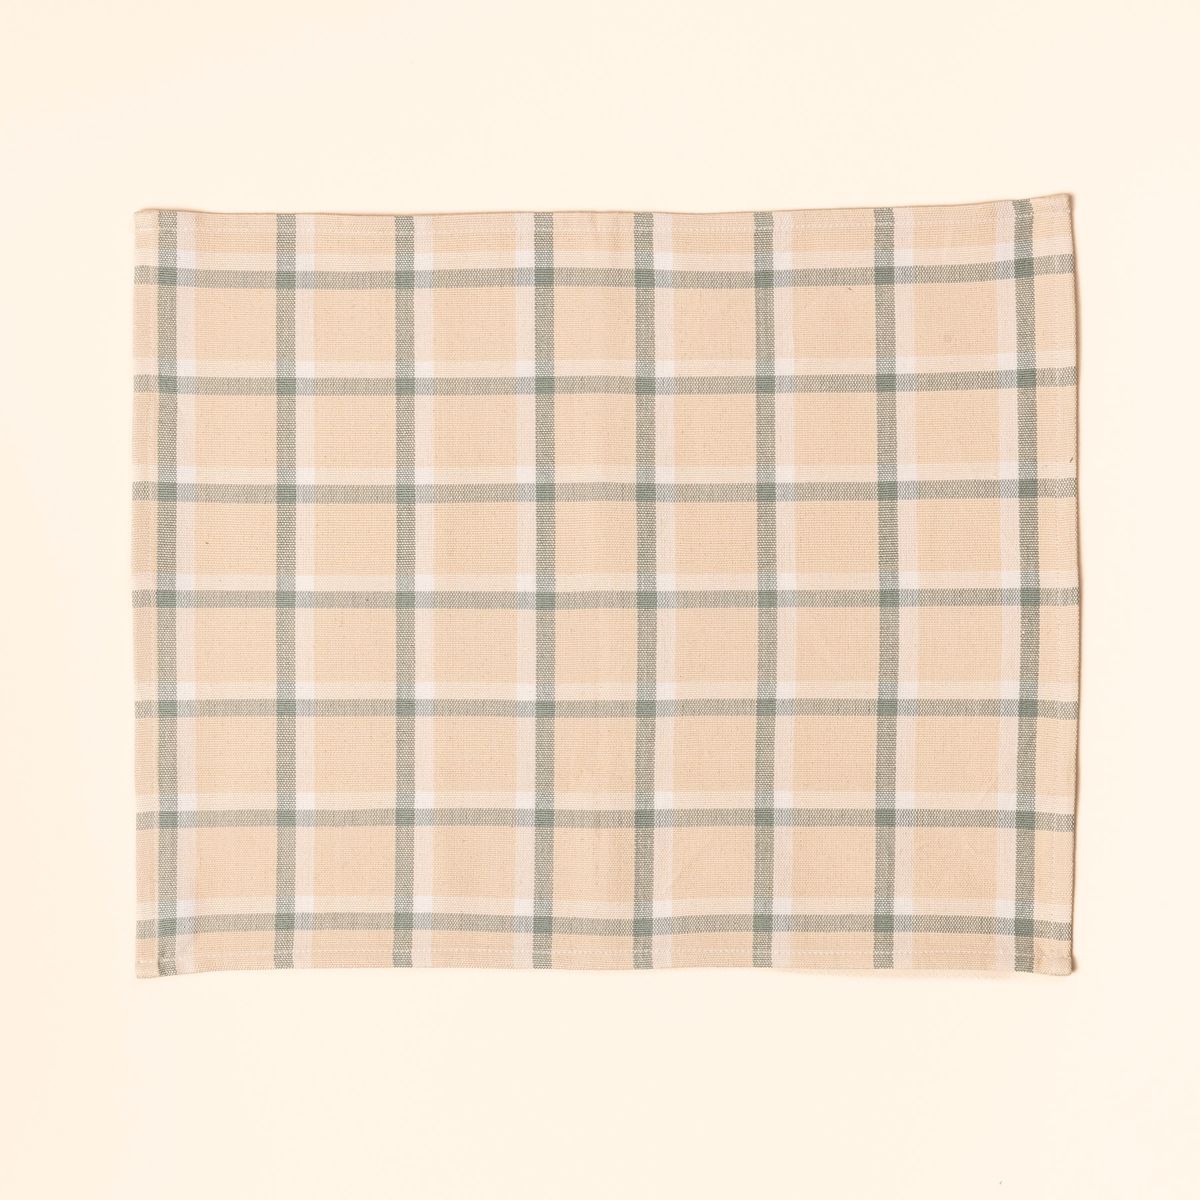 A gingham rectangular placemat in cream, off-white, and sage green colors